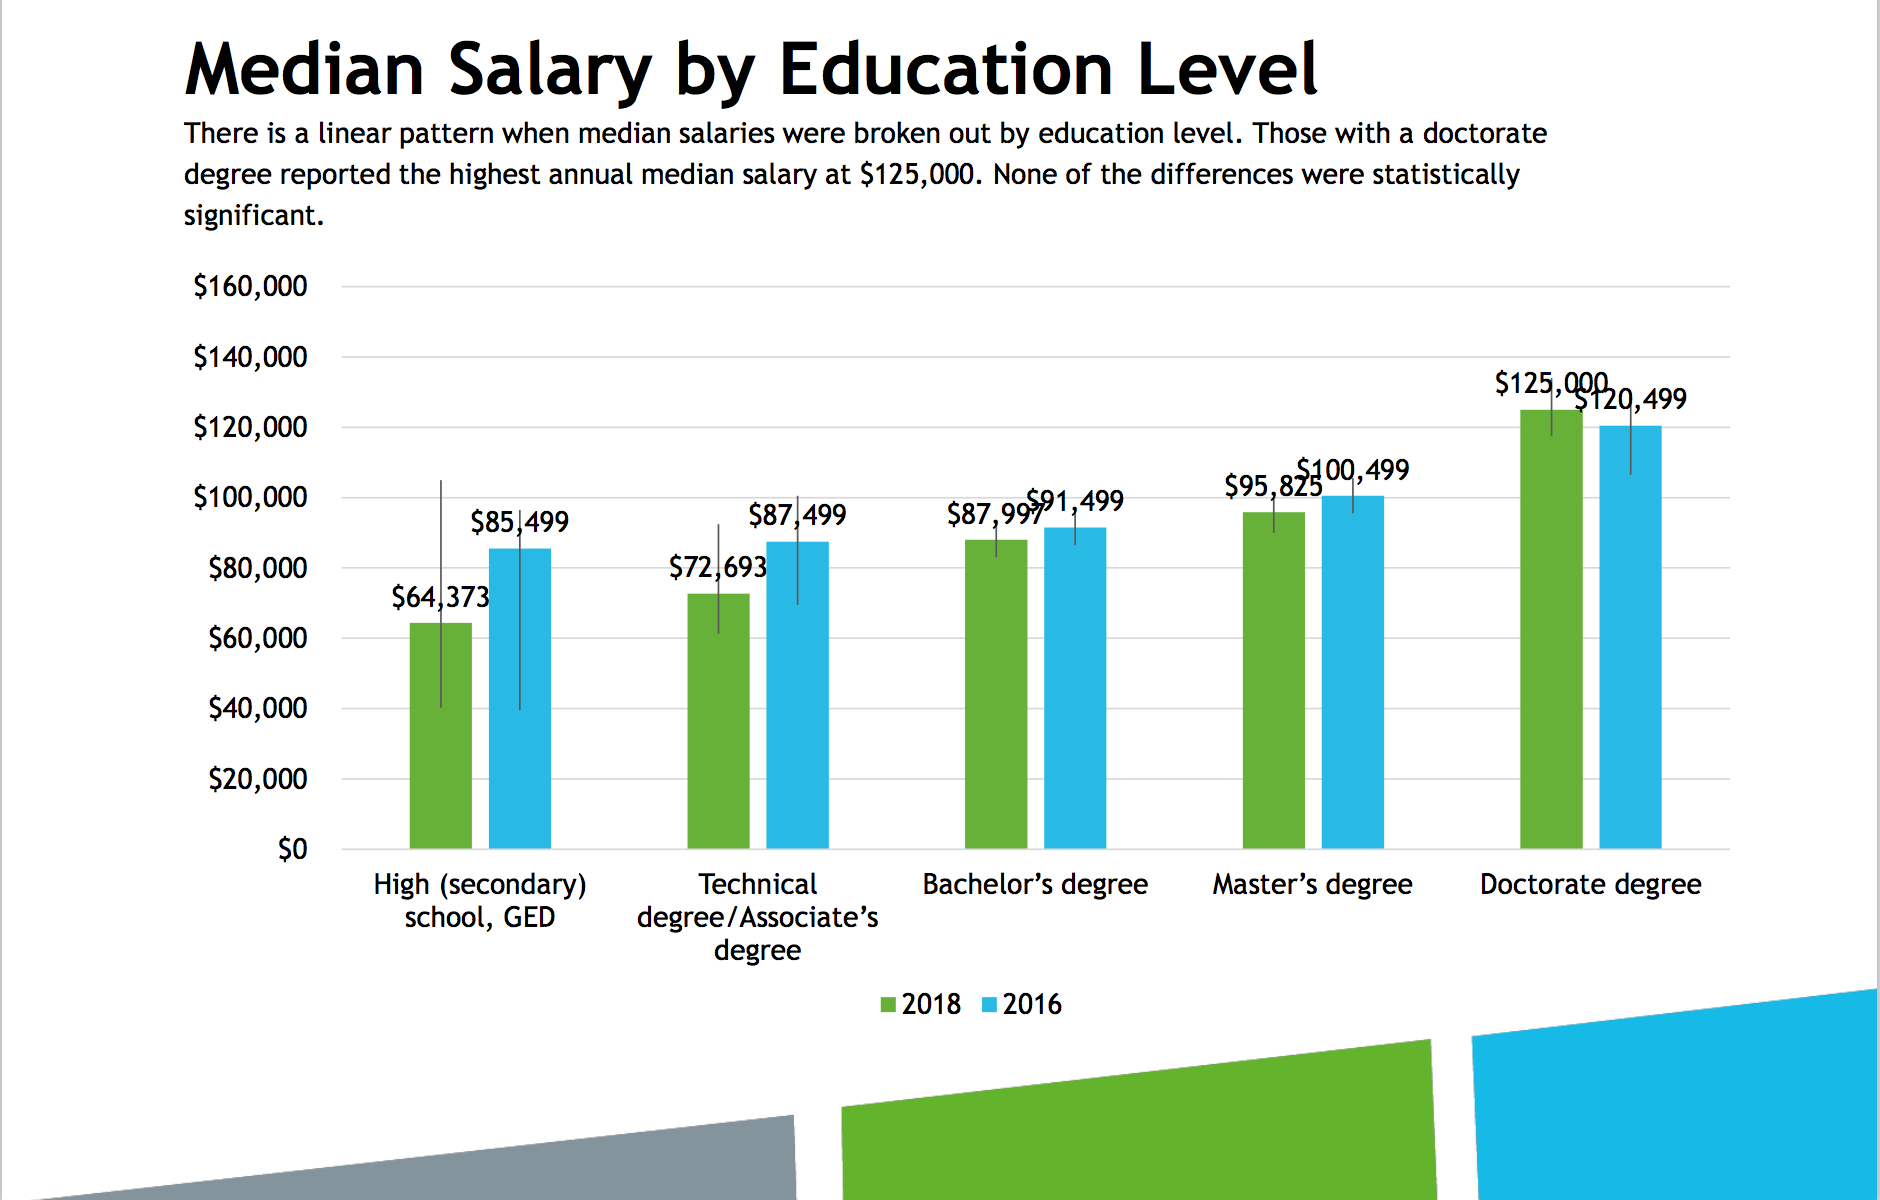 bar chart showing difference in salary by education level as compared to the 2016 survey